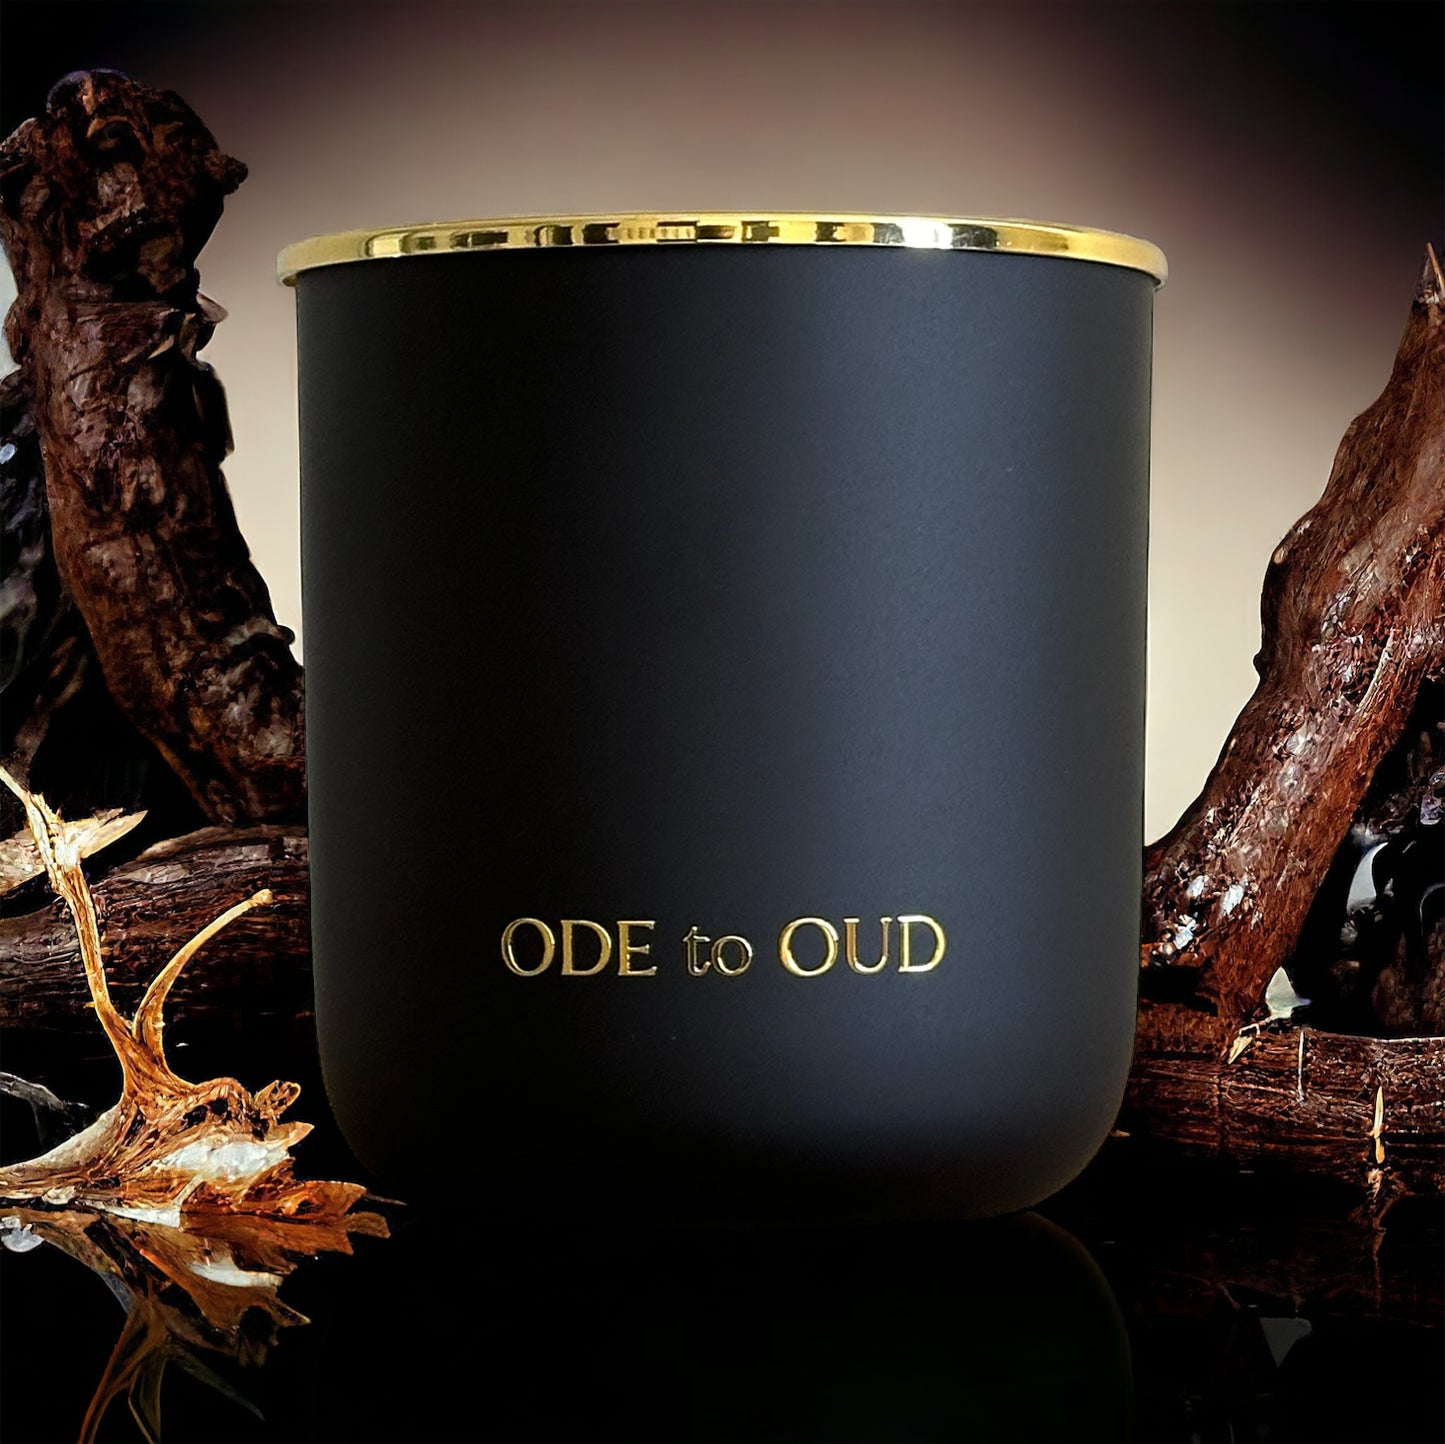 Ode to Oud Private Blend Candle - 8 oz (wholesale)